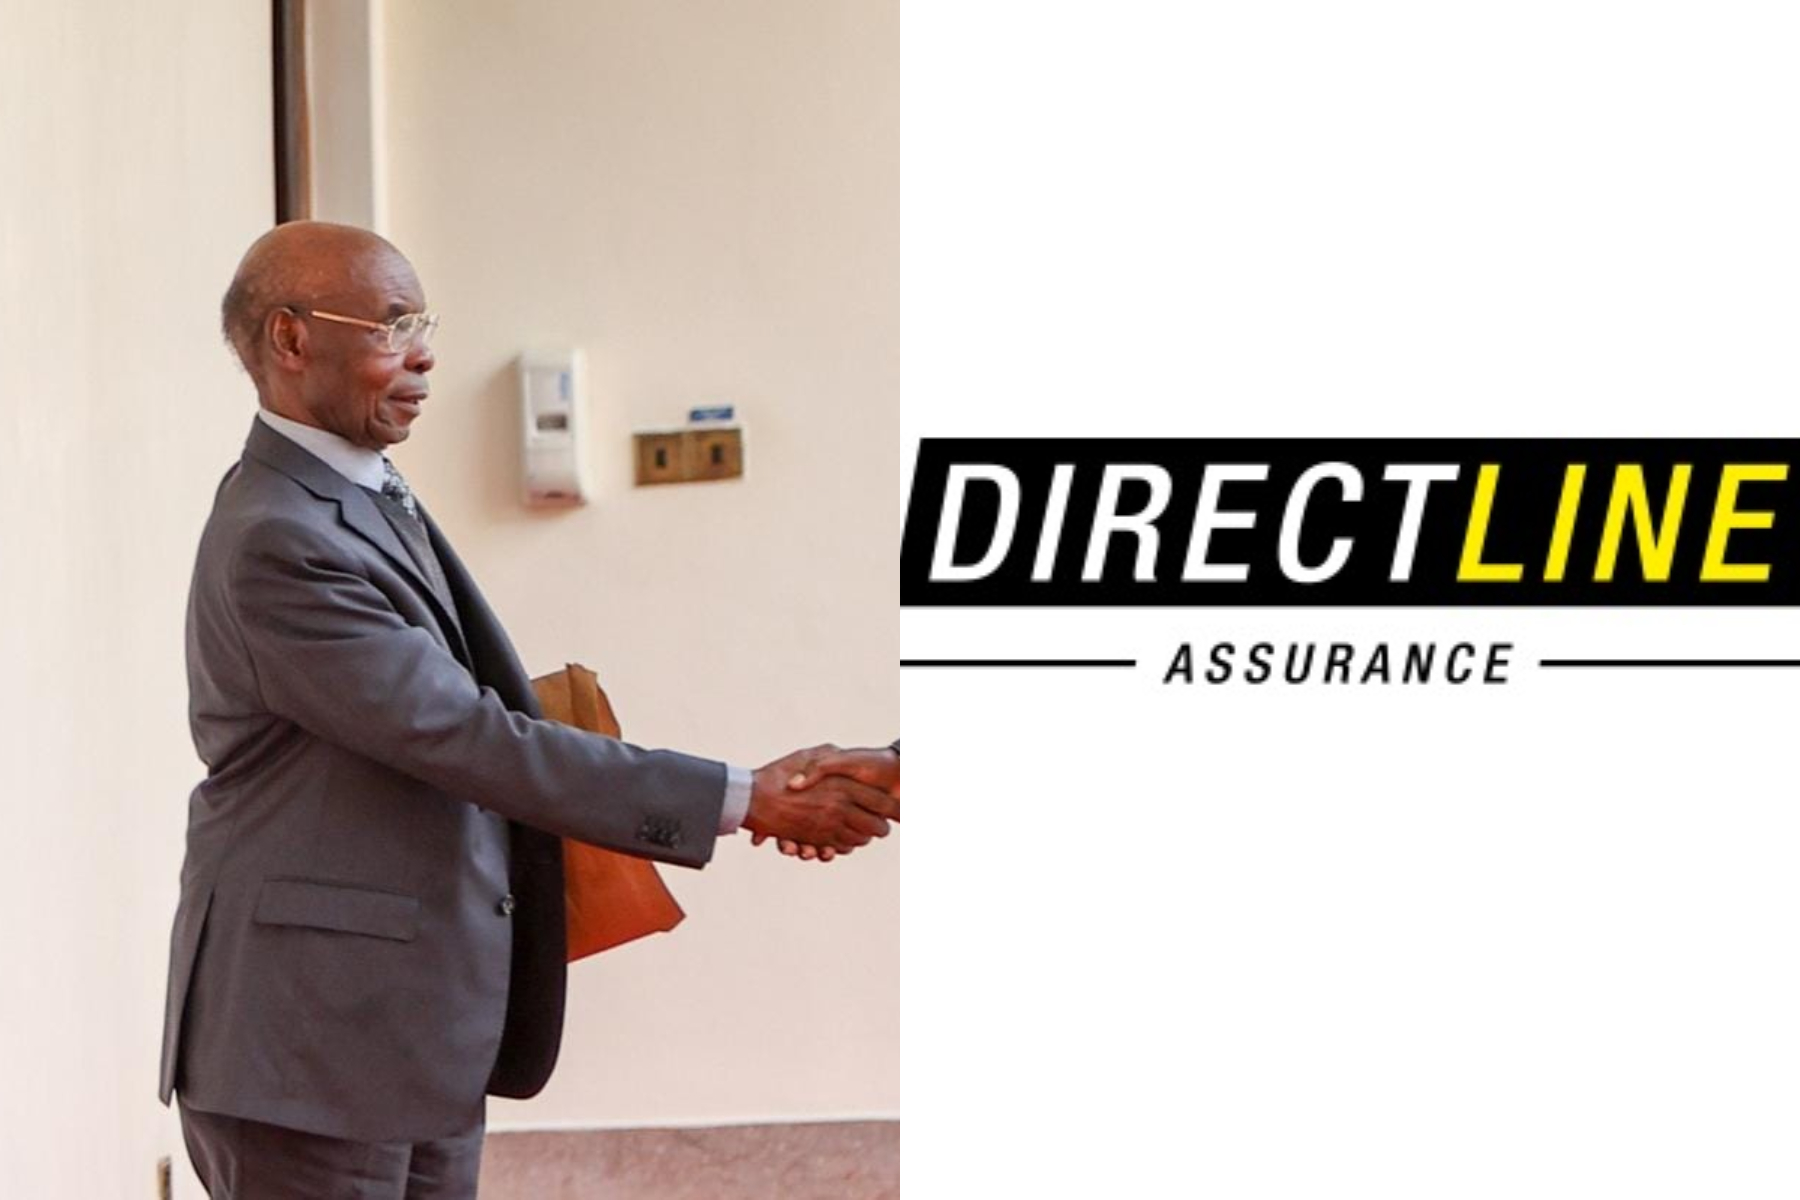 Photocollage of SK Macharia and Directline Assurance Logo.